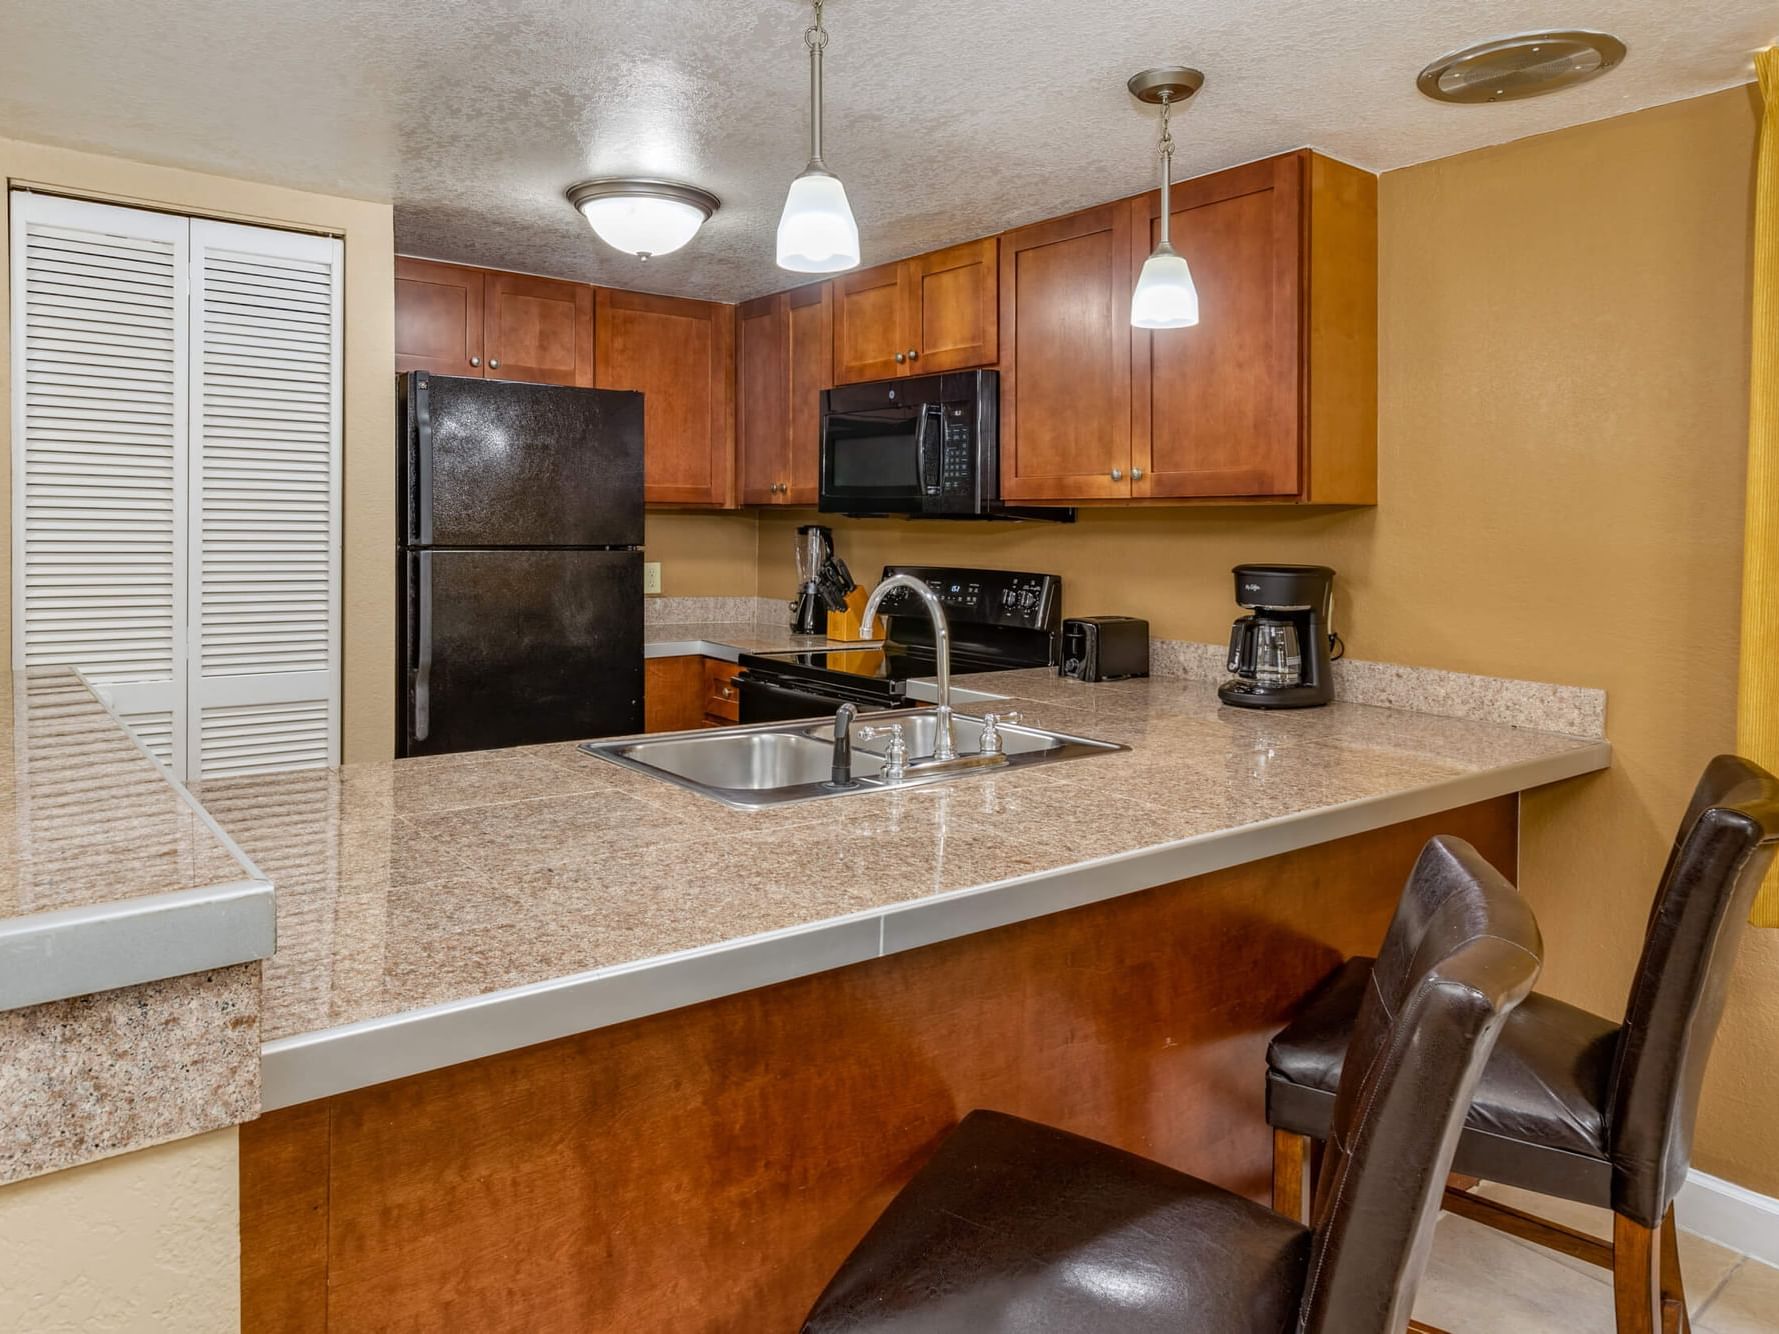 Kitchen of Two Bedroom Suite at Legacy Vacation Resorts